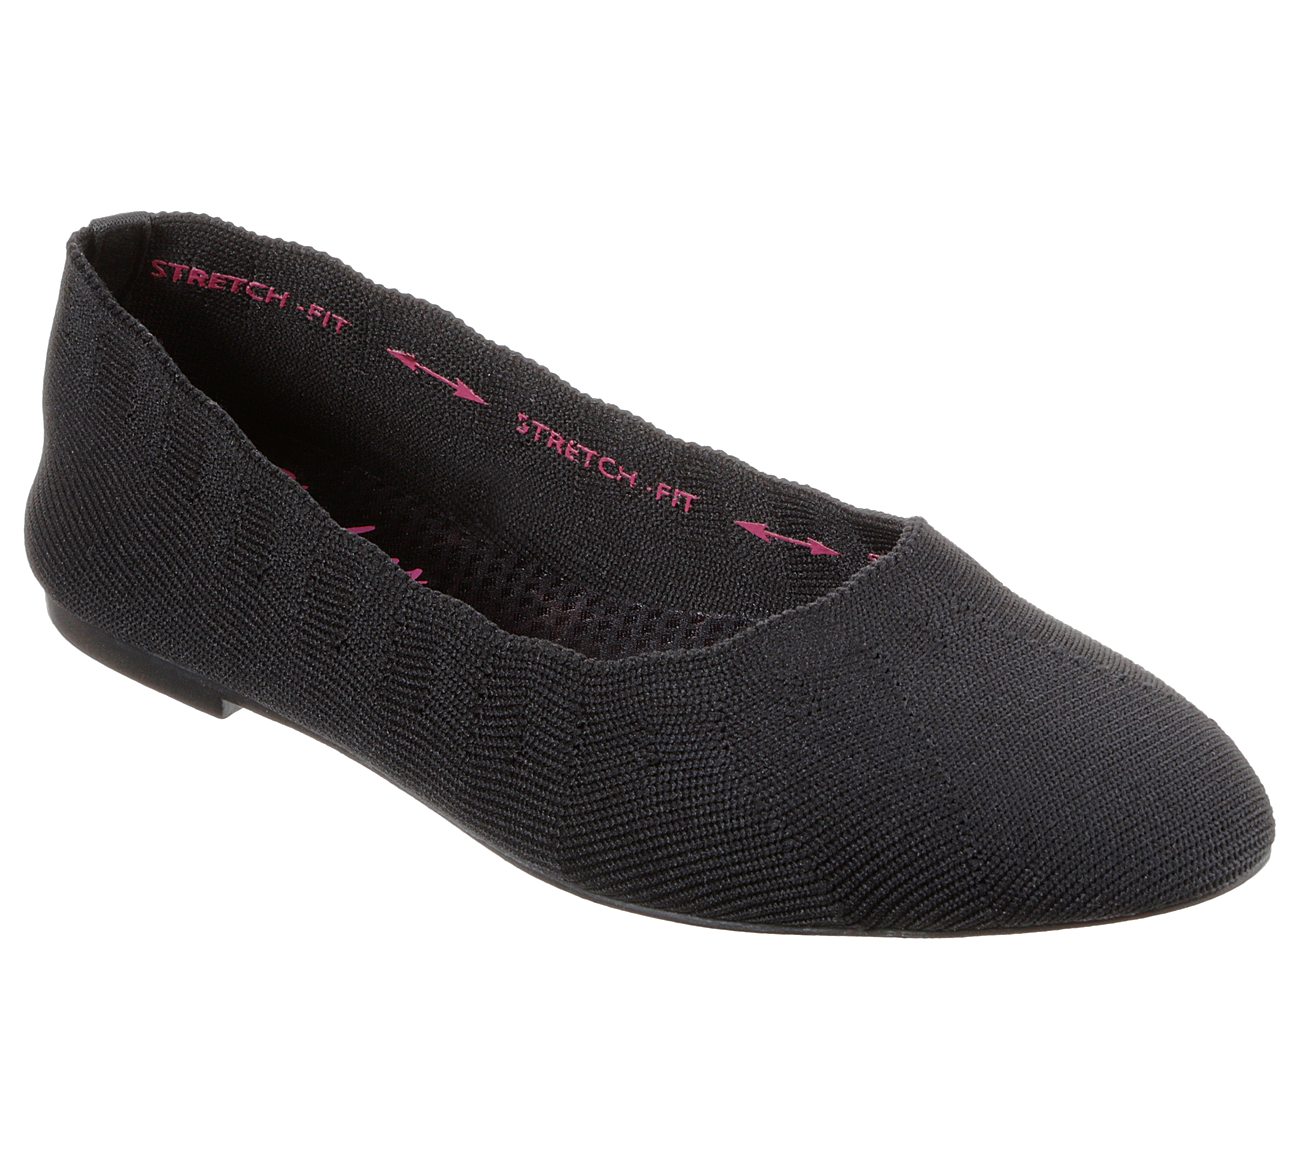 CLEO - BEWITCH, BBBBLACK Footwear Lateral View